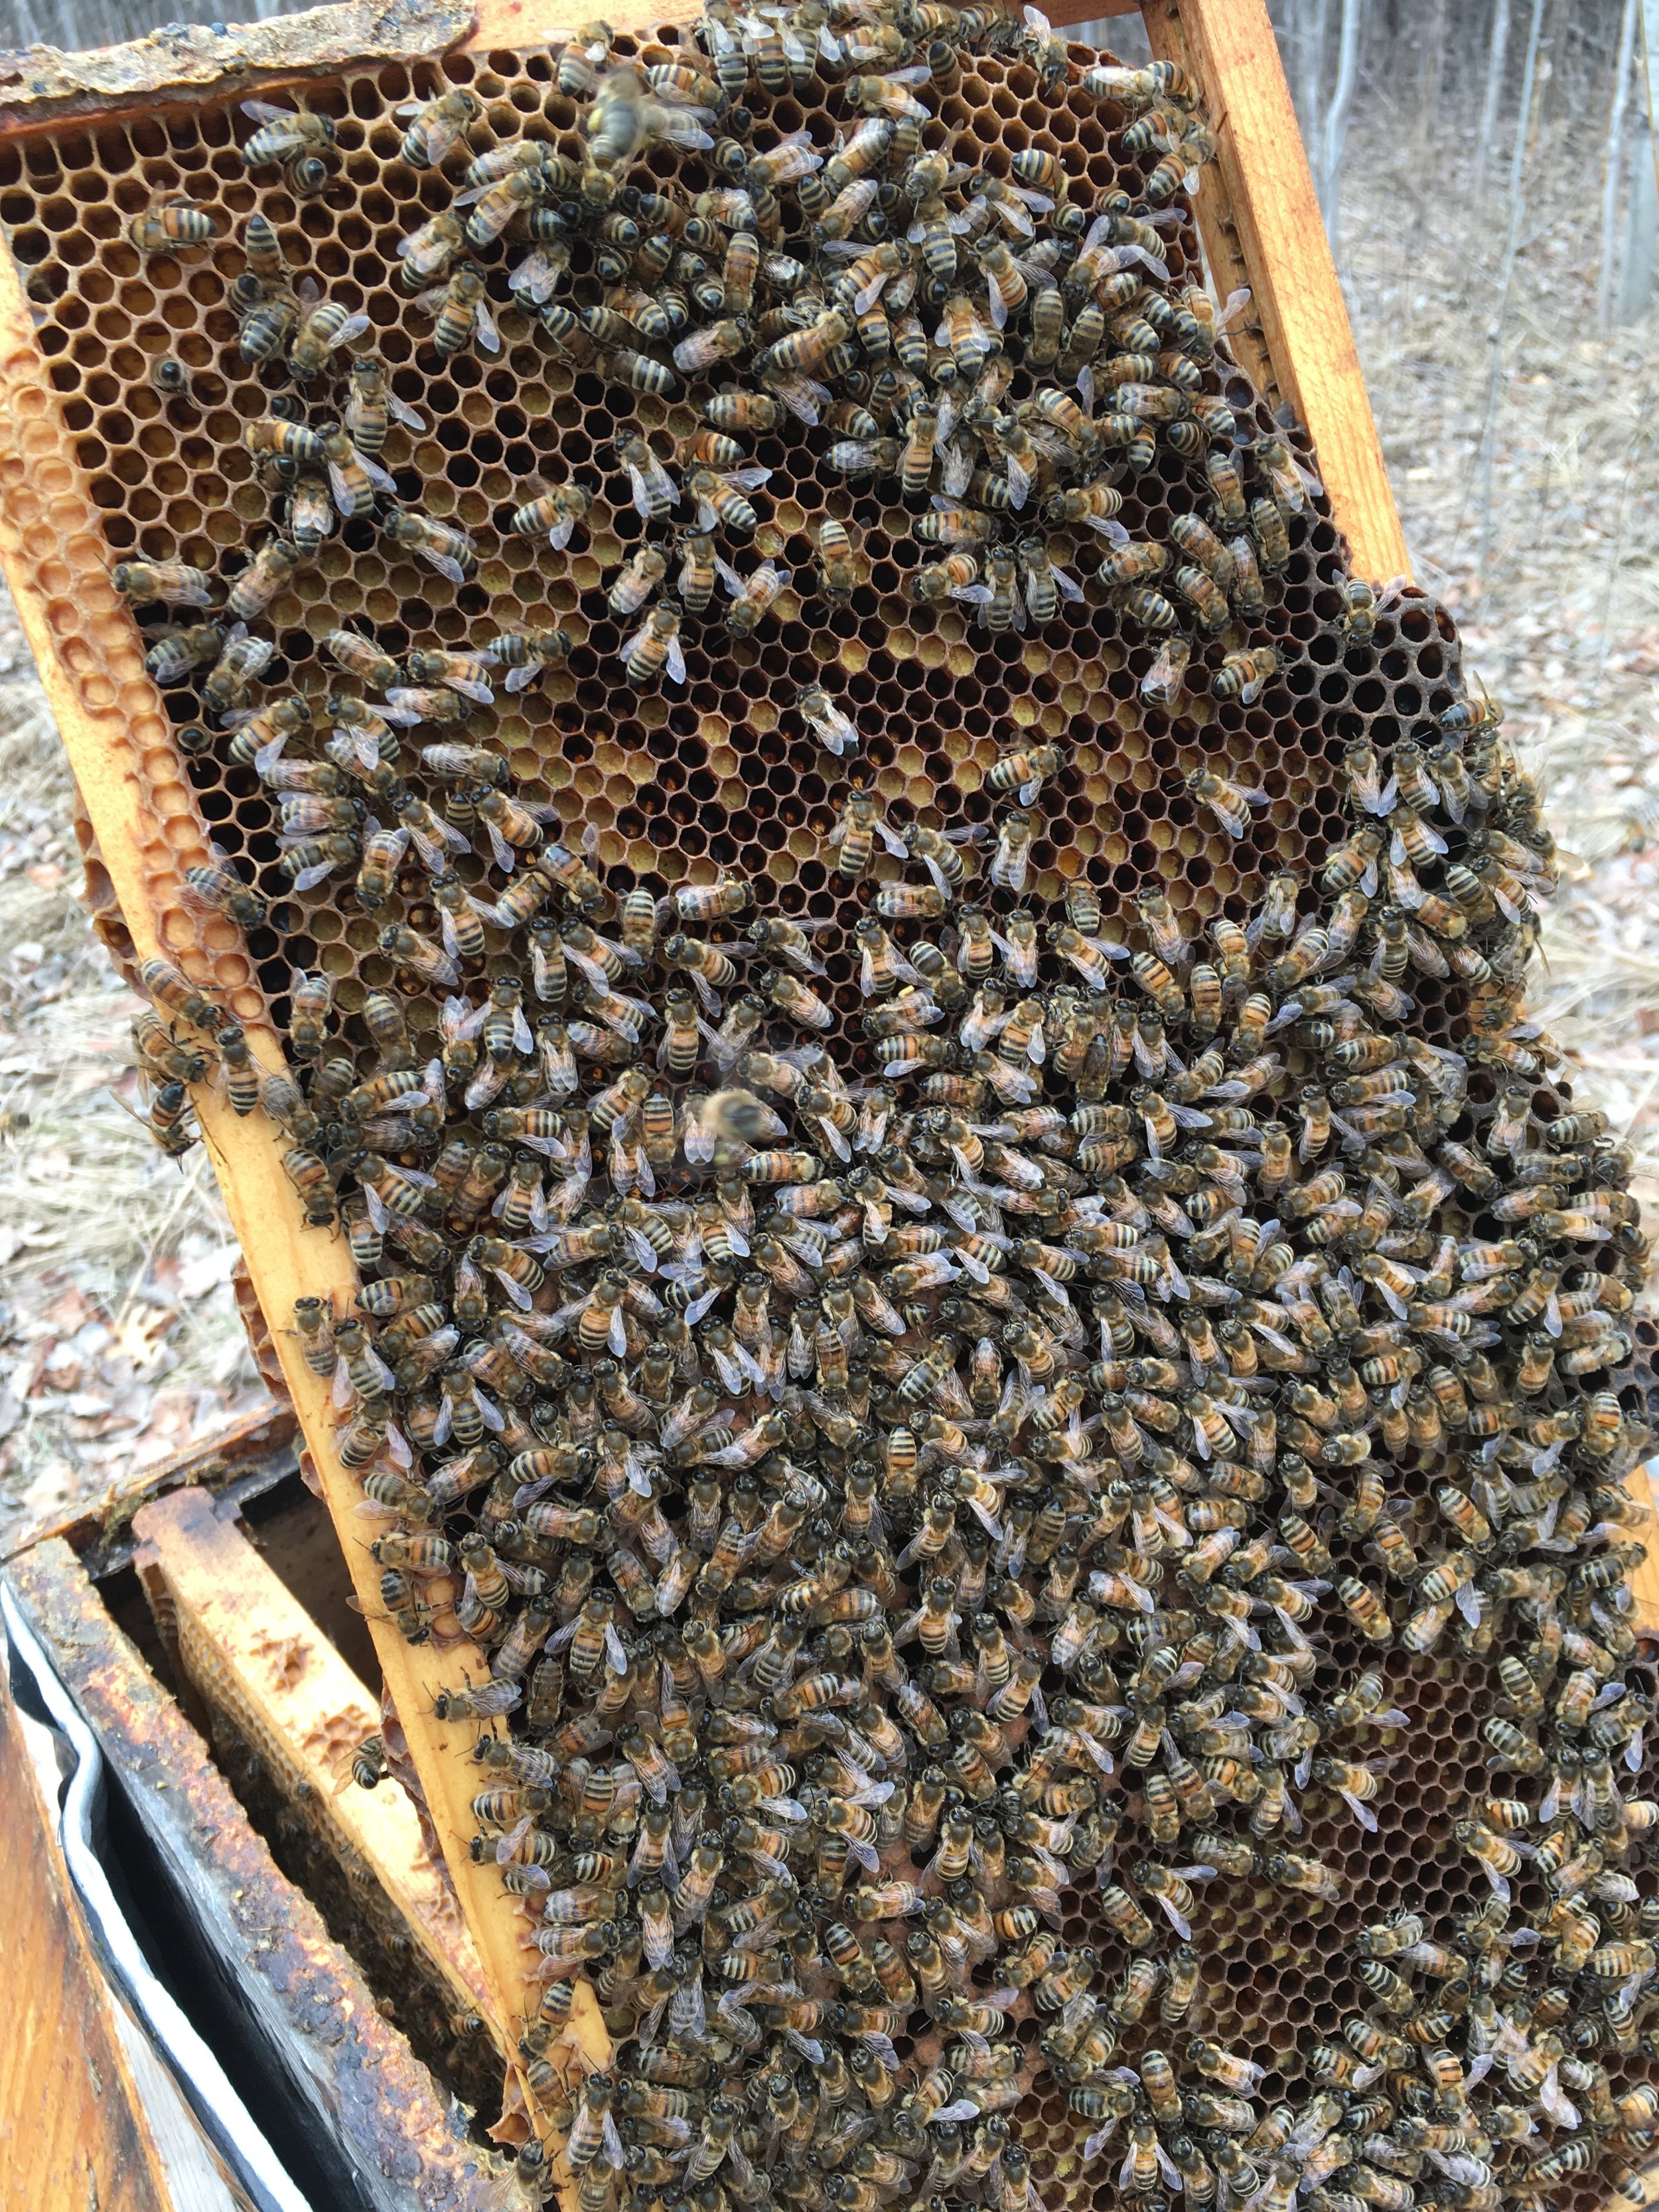 Fridley hive w/fresh pollen and patch of brood on April 8th